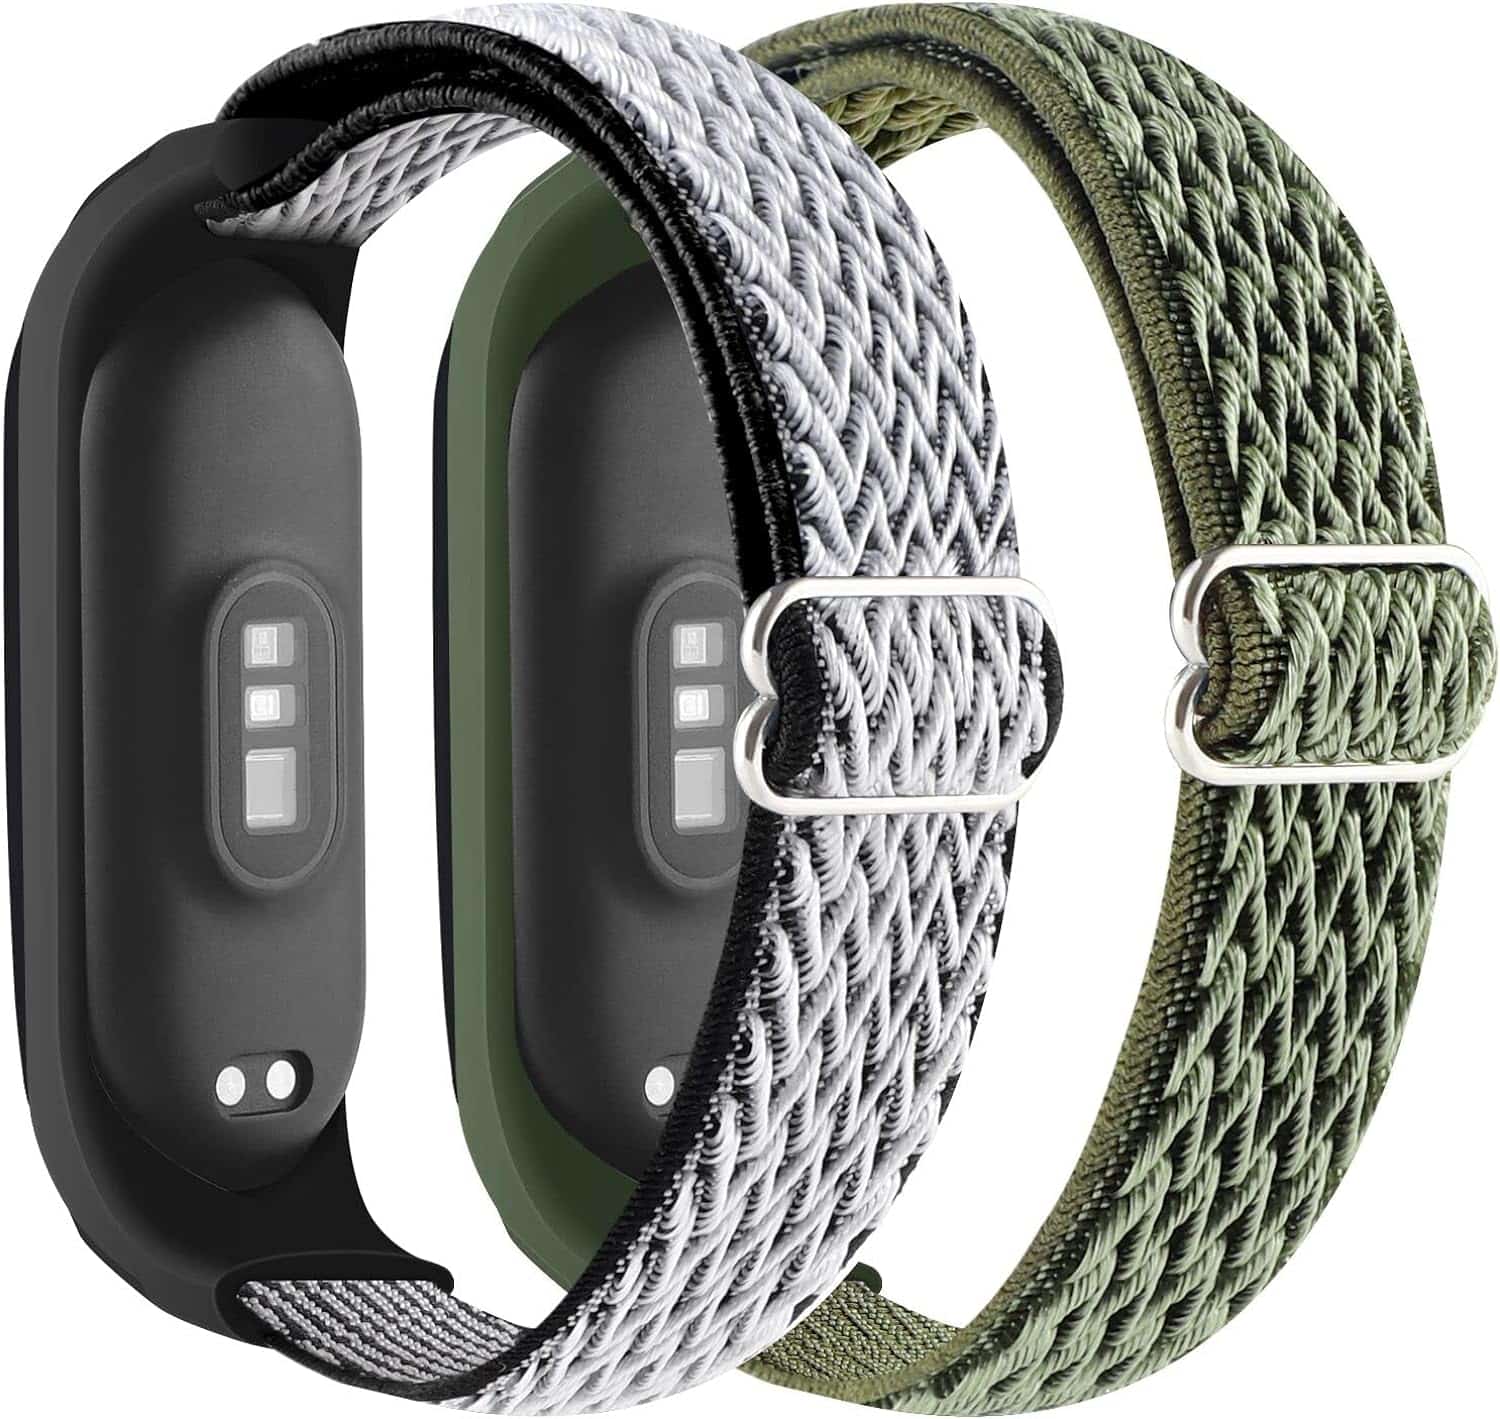 REALSIGN Adjustable Elastic Band: A Must-Have Accessory for Xiaomi MI BAND Users